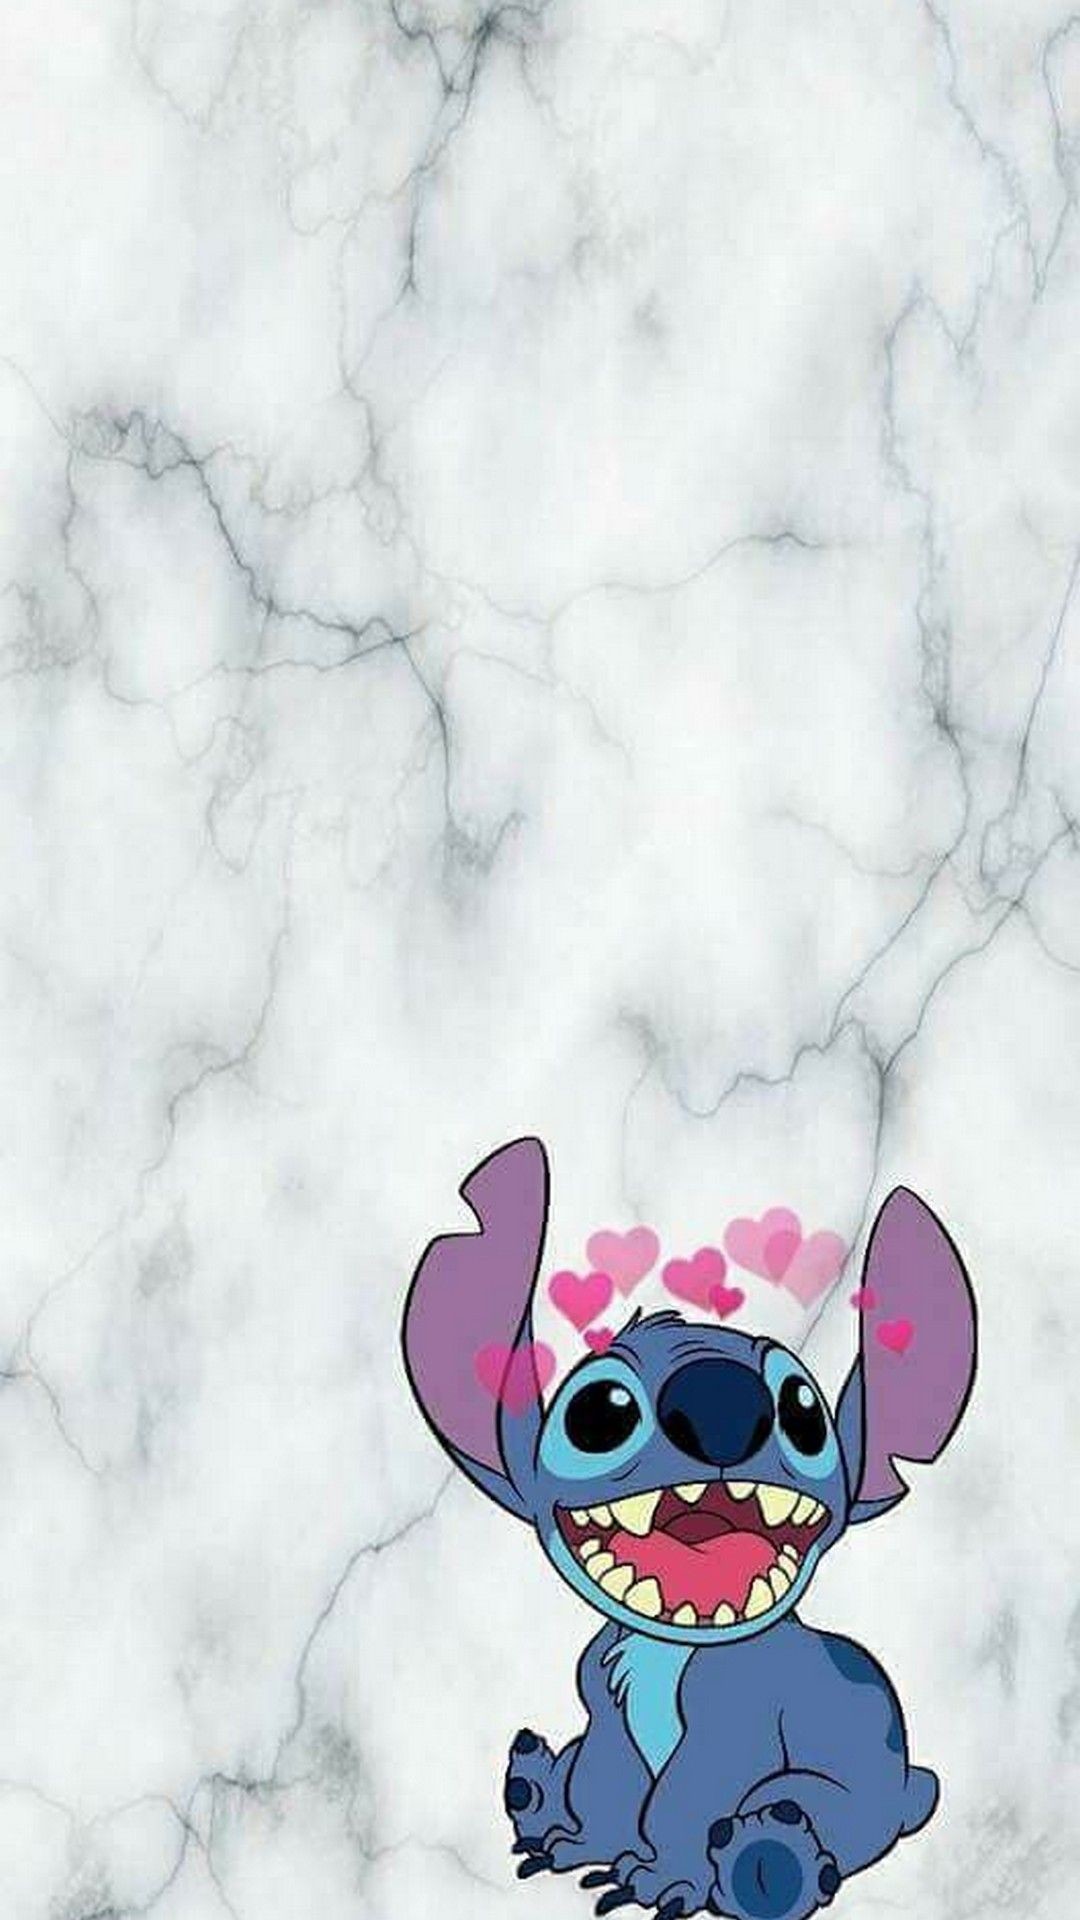 1080x1920 Stitch Wallpaper For Phone | Best HD Wallpapers